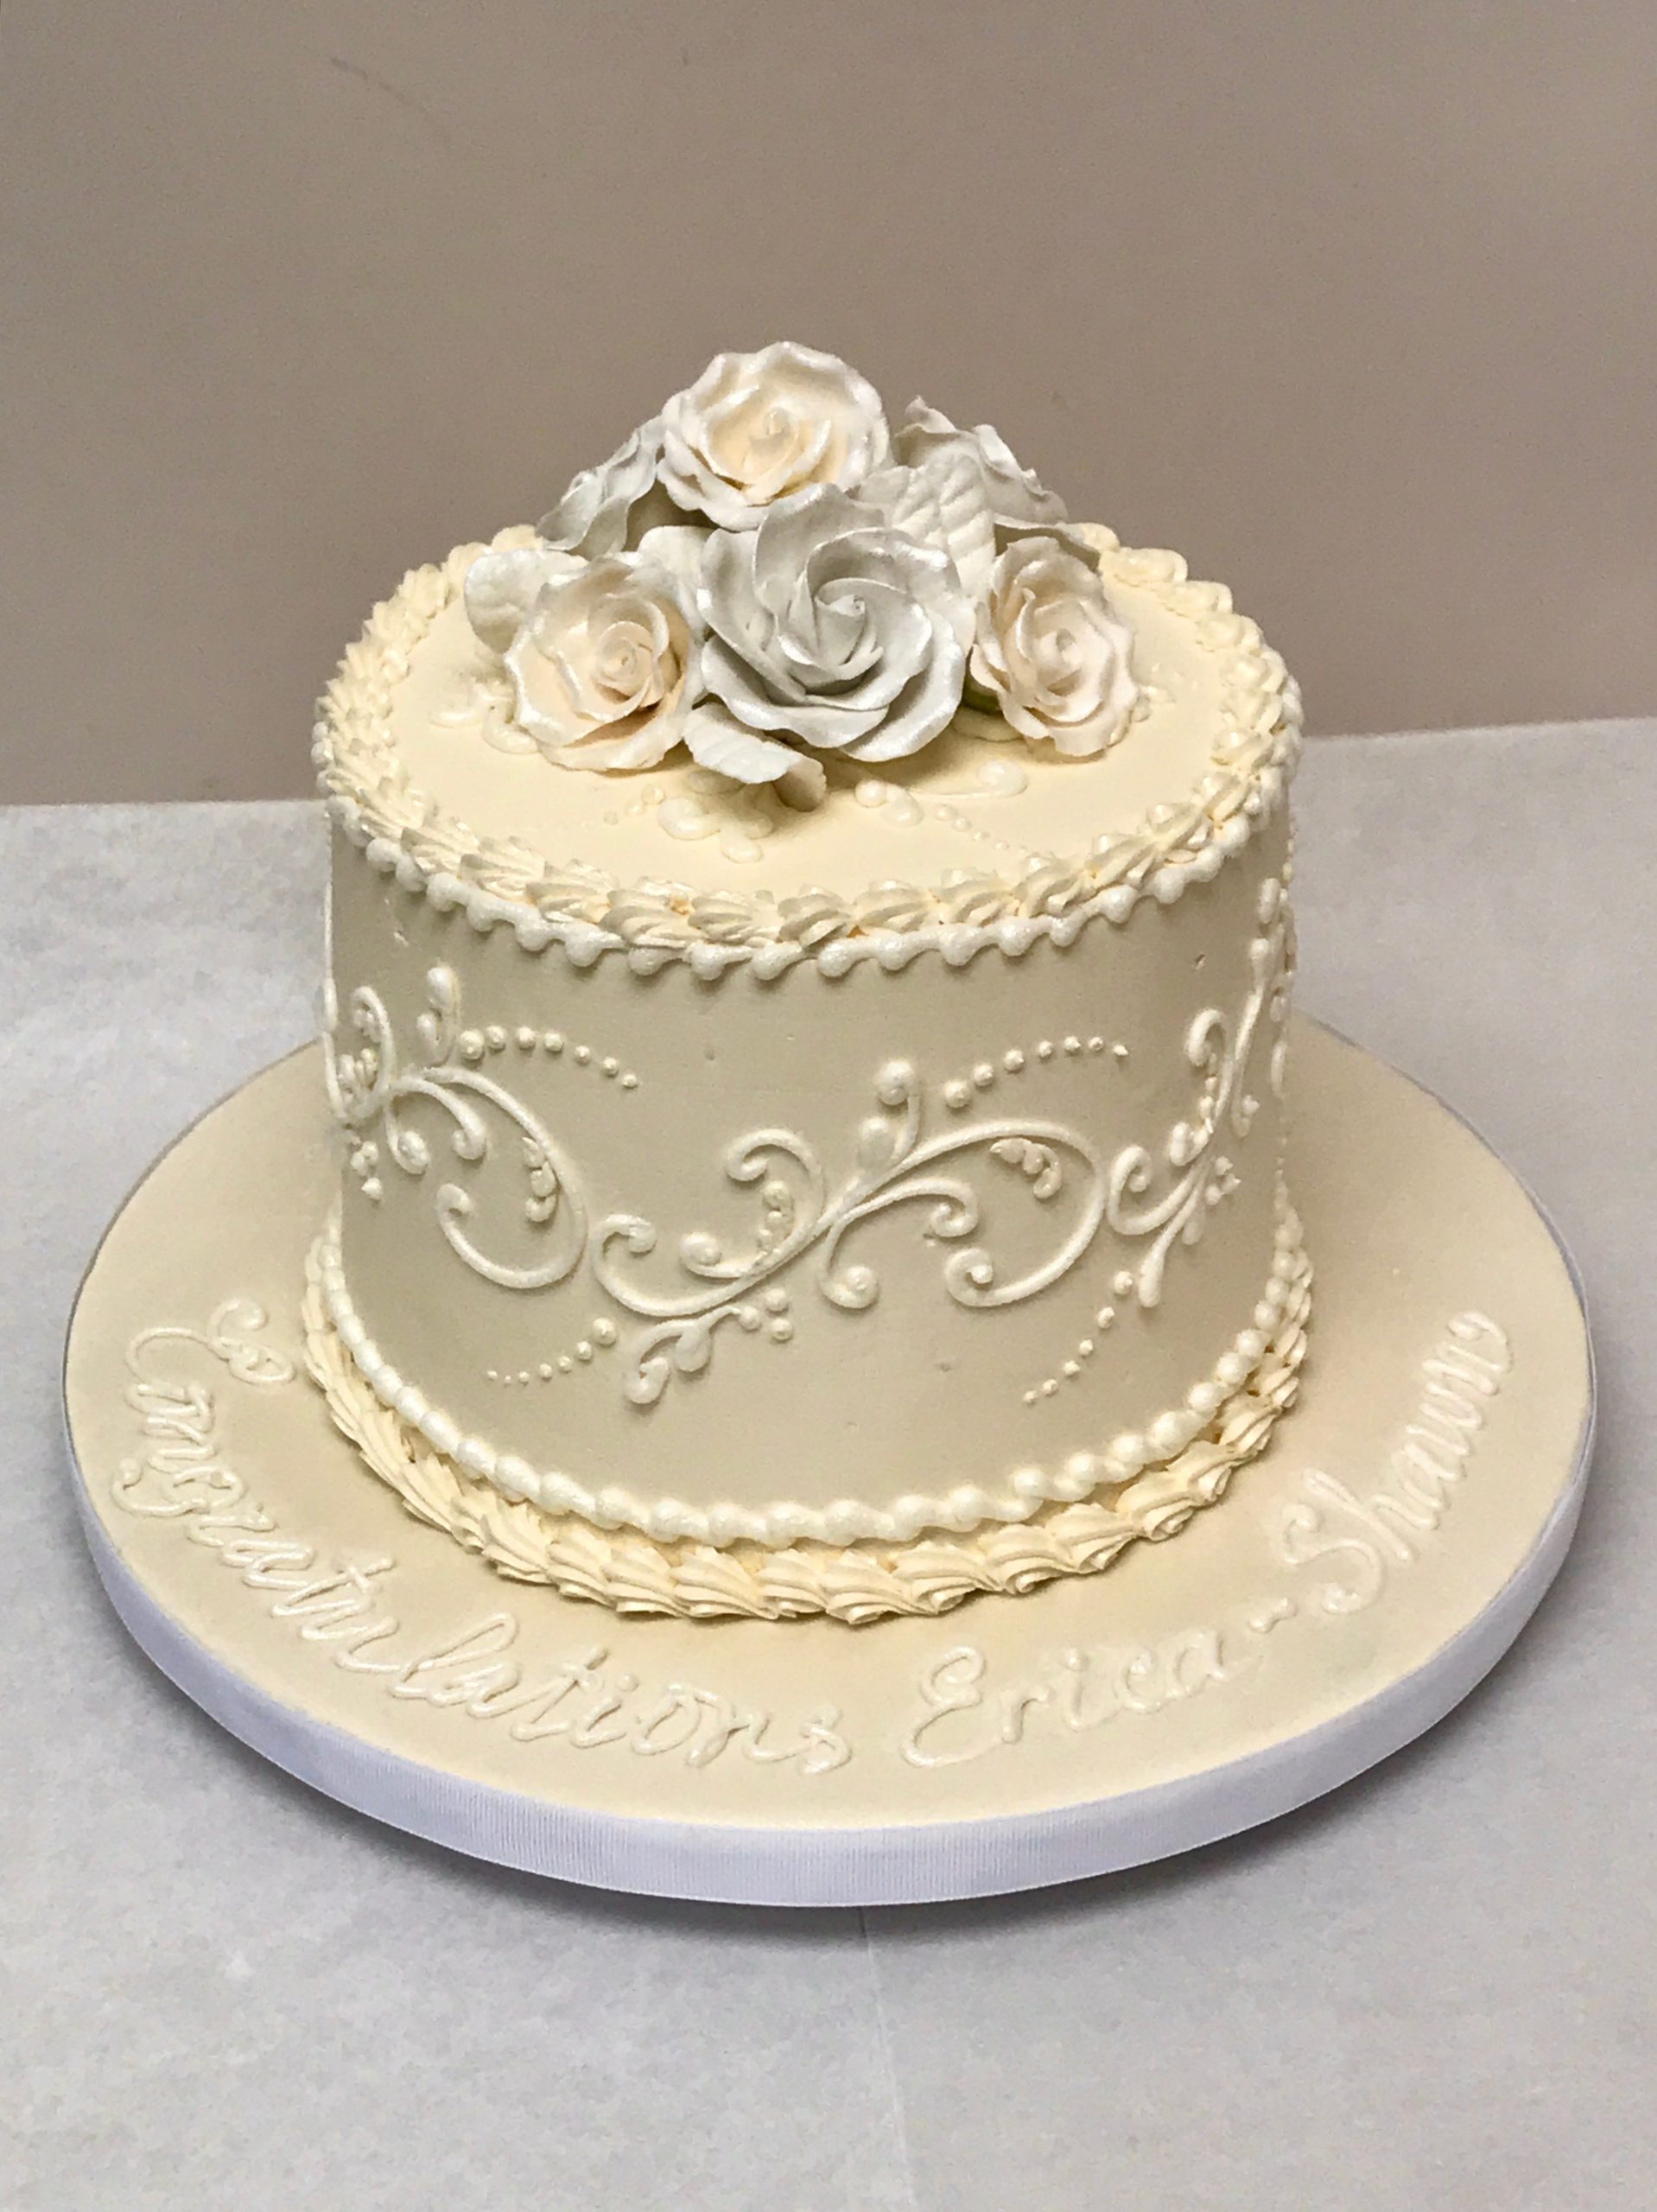 Engagement cakes - Fancy Cakes by Rachel